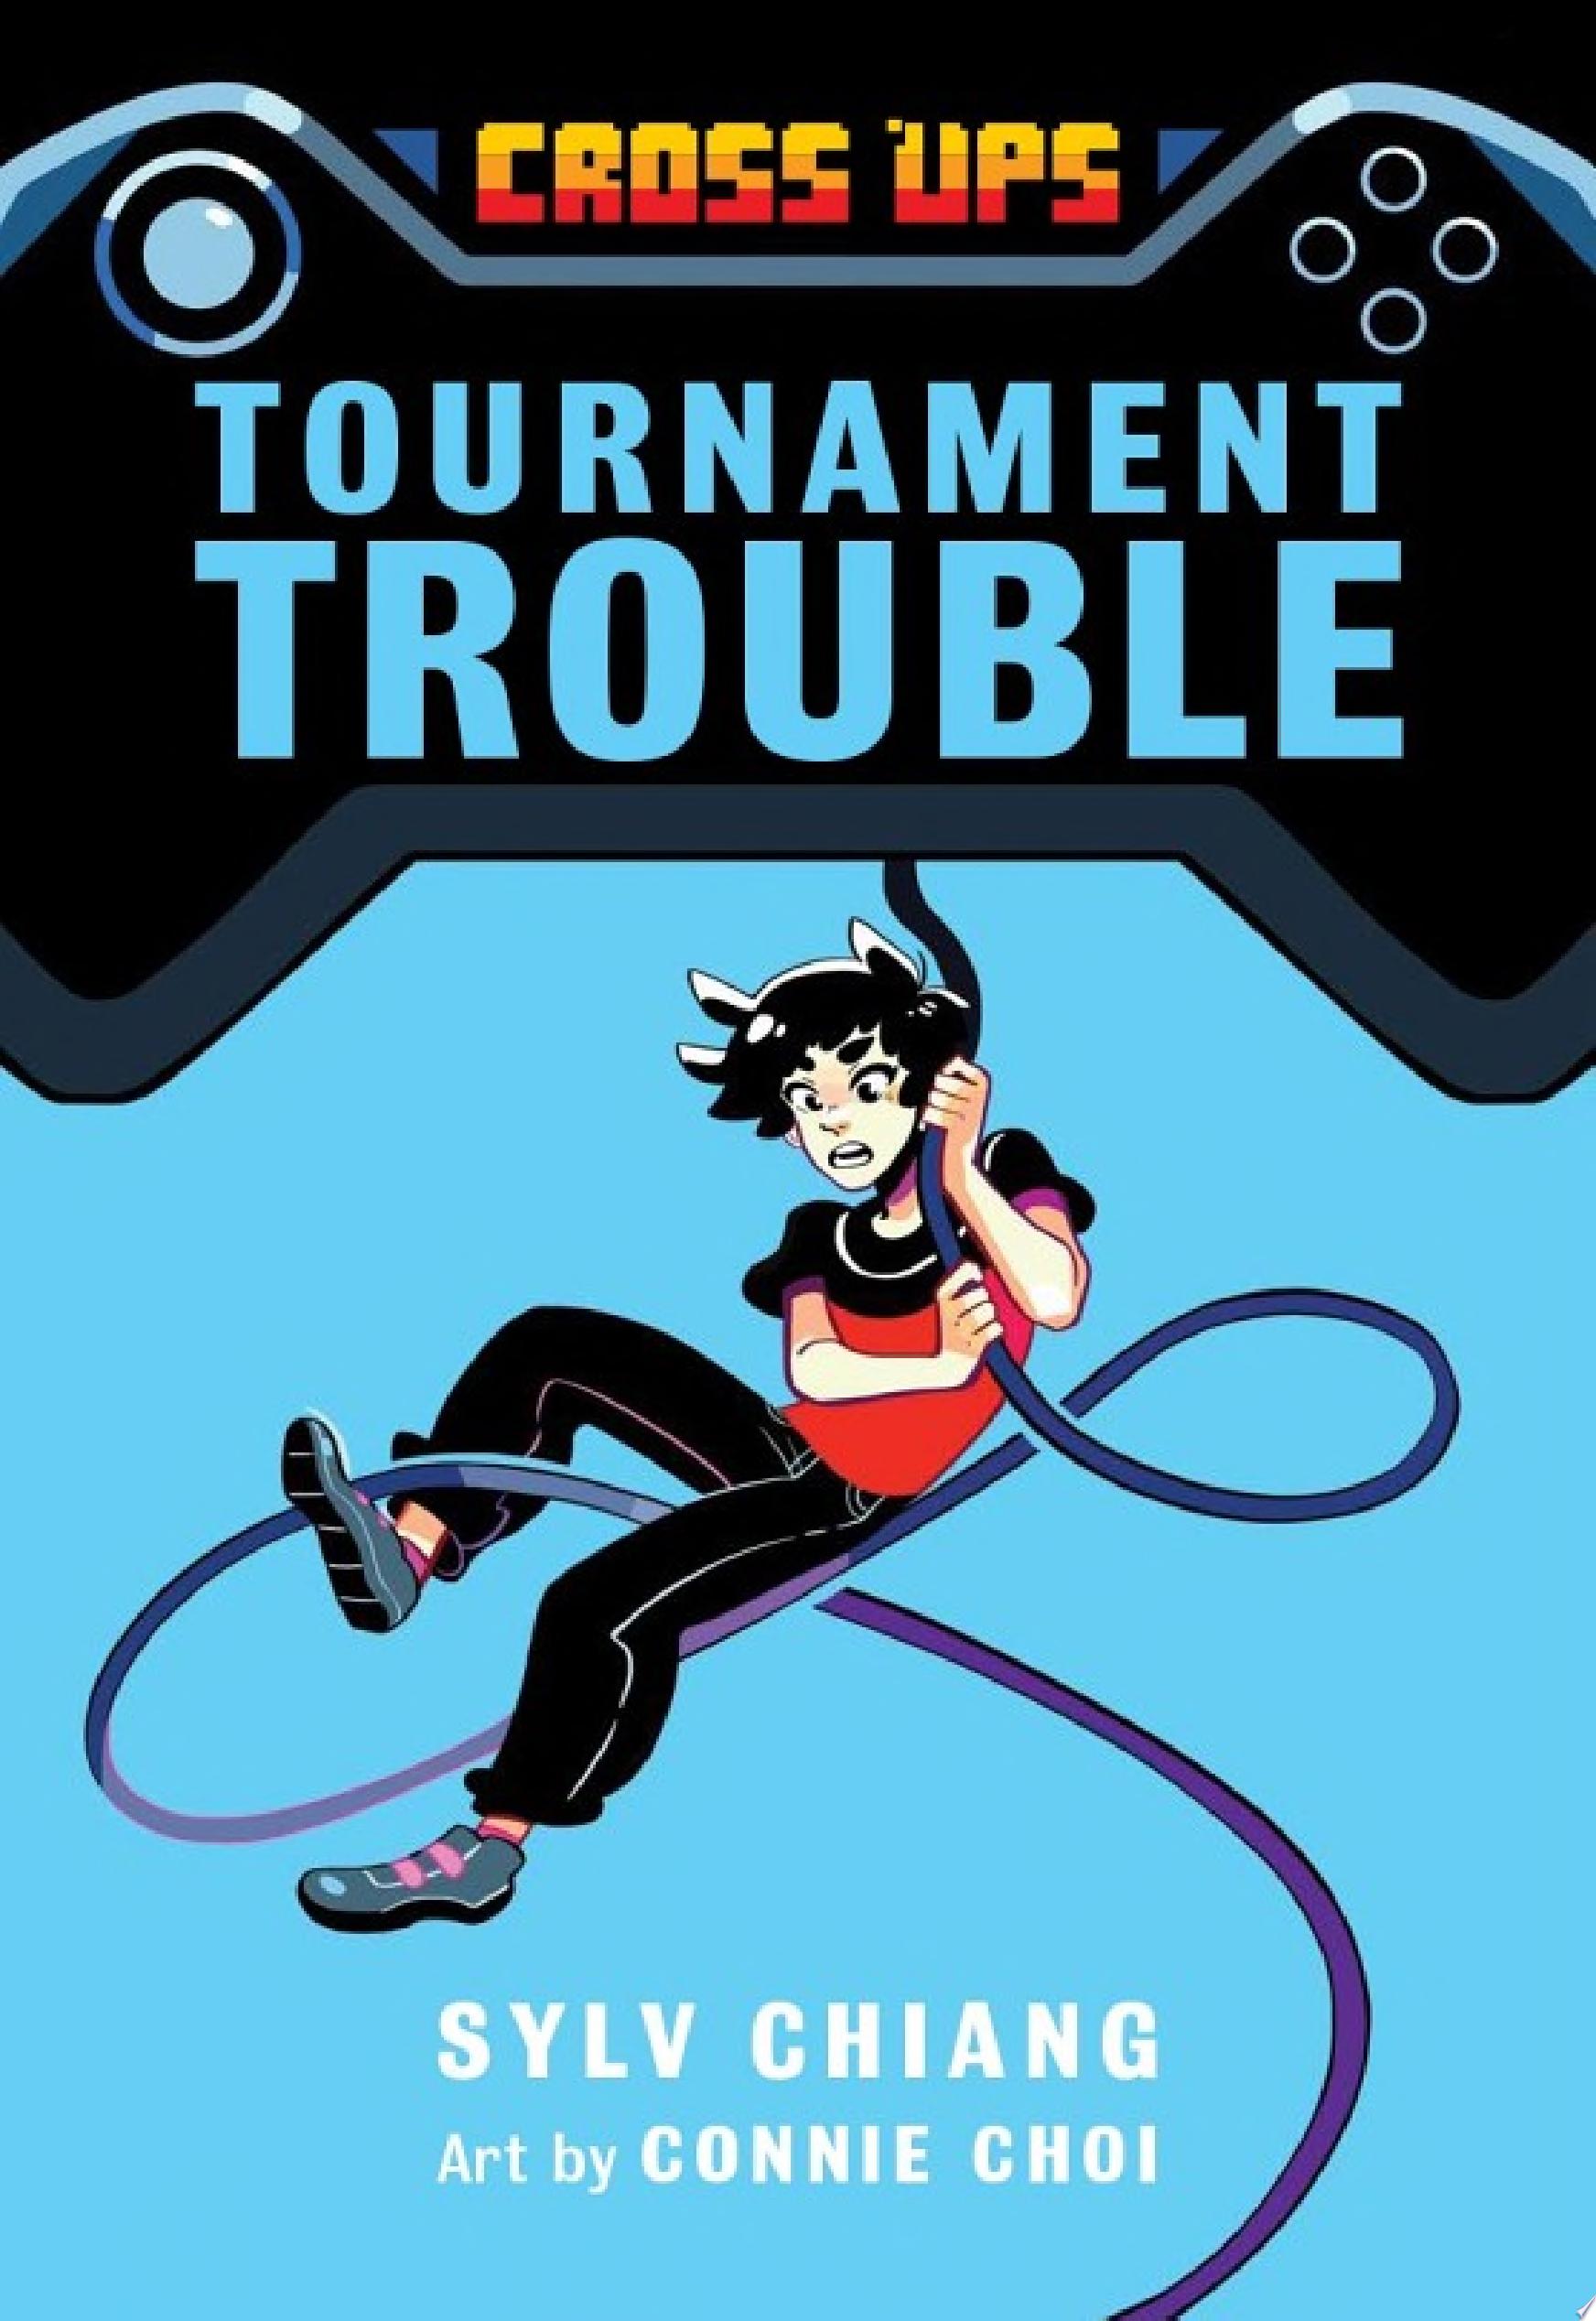 Image for "Tournament Trouble (Cross Ups, Book 1)"